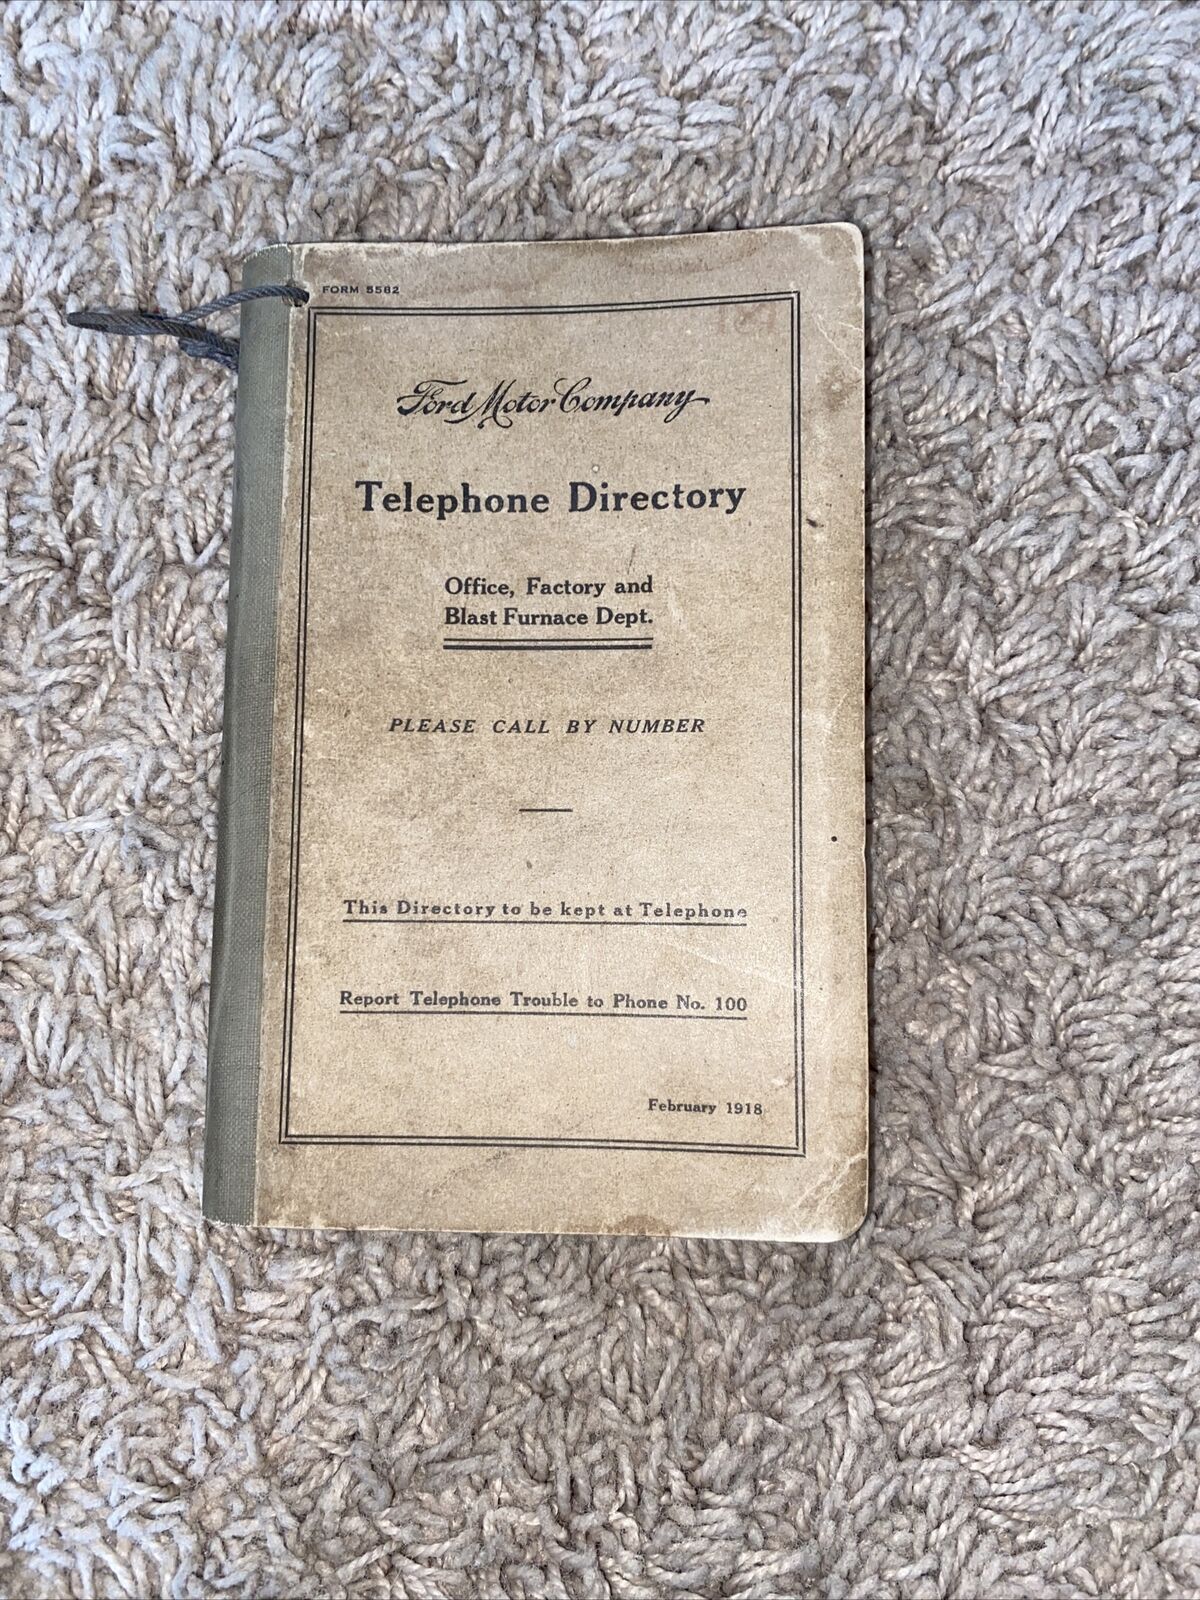 Authentic Original Ford Motor Company Telephone Directory Henry Ford 1918